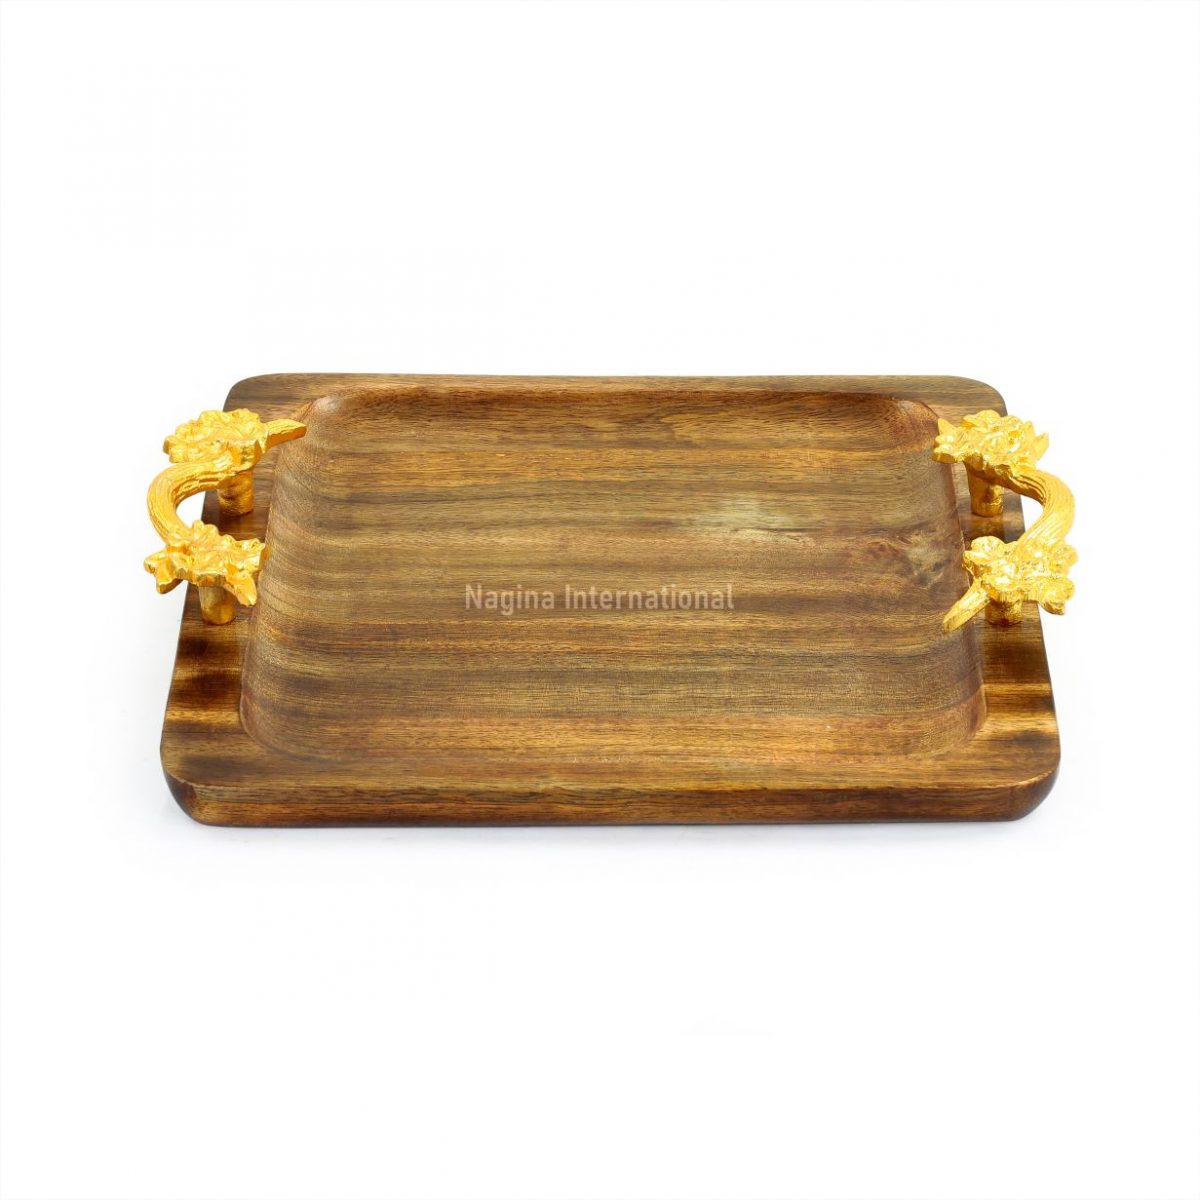 Kitchen Tray With Brass Plated Decor Flower Handles